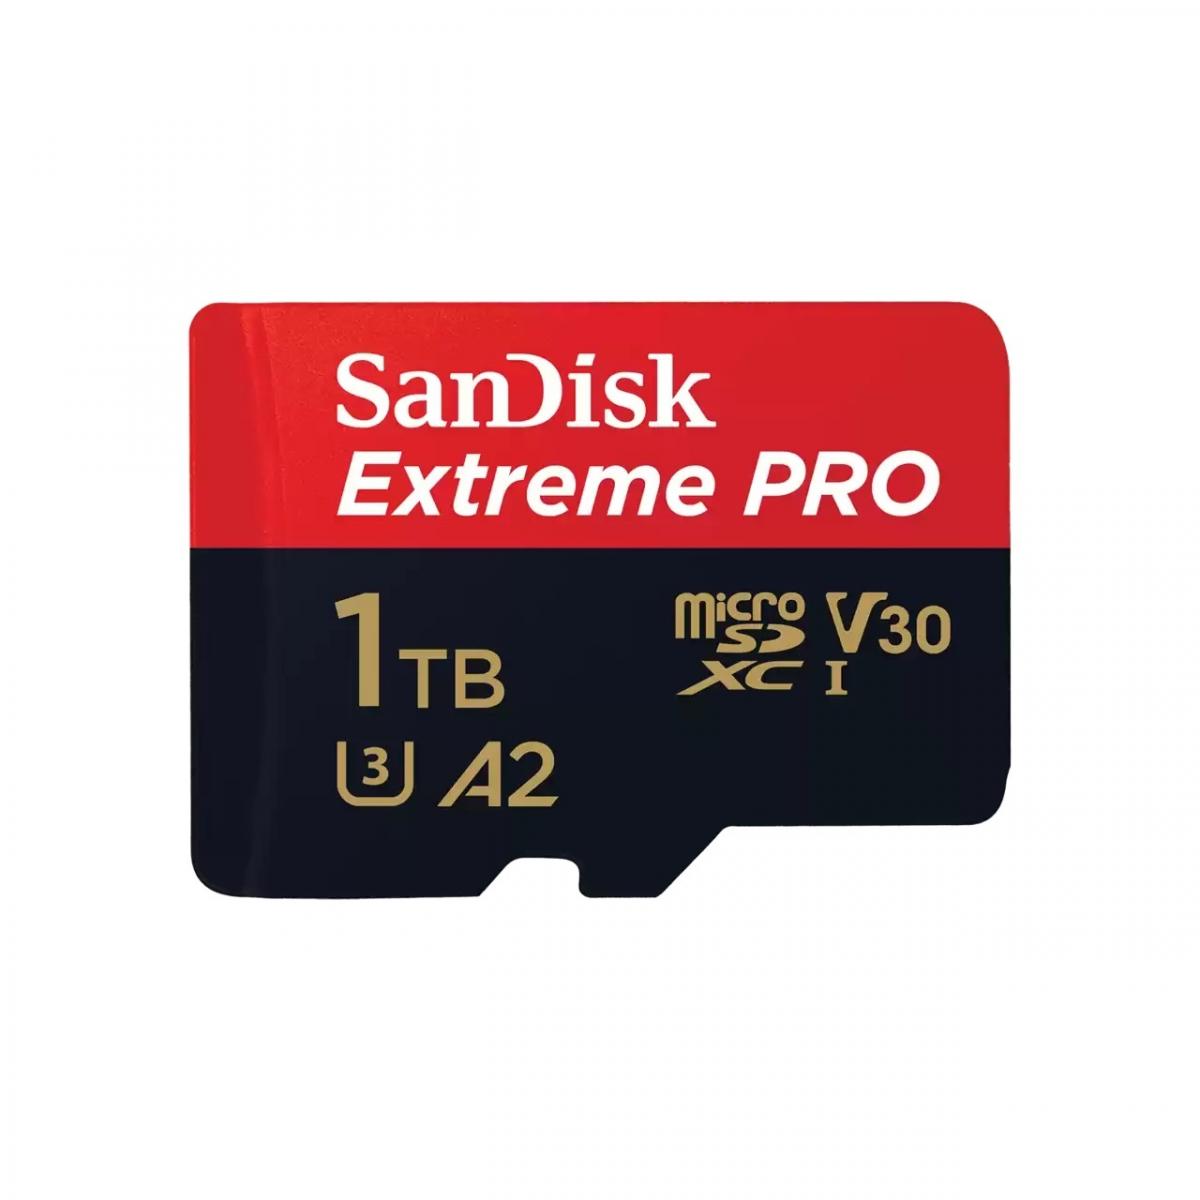 Extreme Pro MicroSDXC Card 1TB UHS-I 200MB/R 140MB/W with SD Adapter